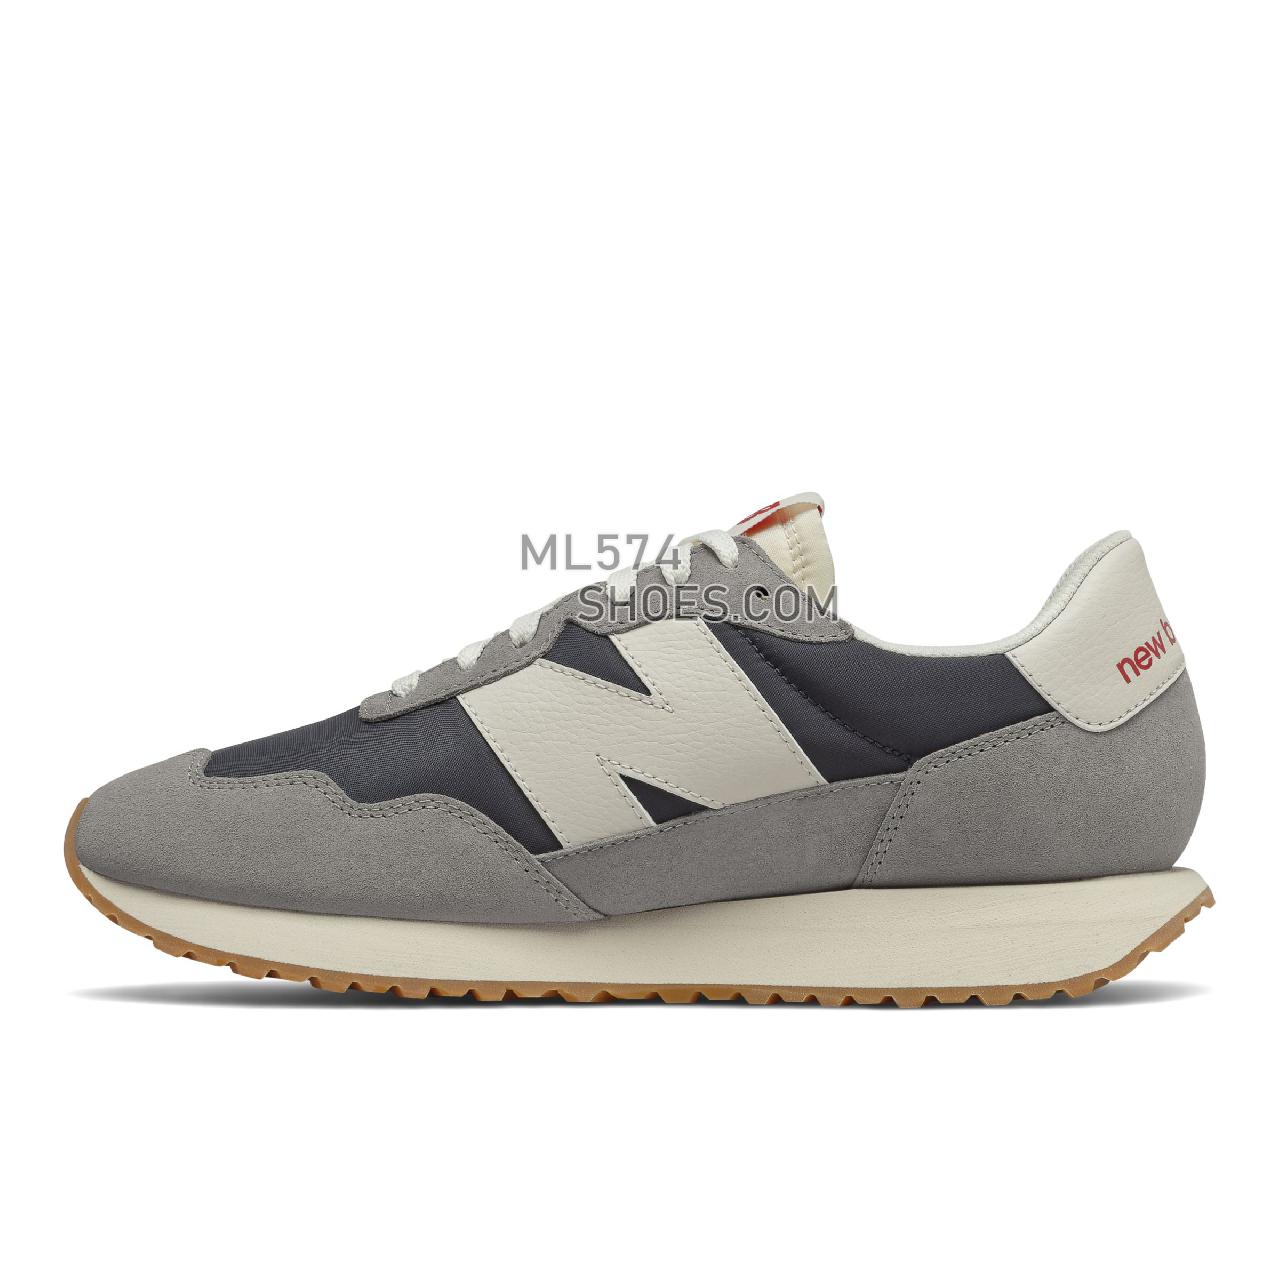 New Balance 237 - Men's Classic Sneakers - Marblehead with Moonbeam - MS237SC